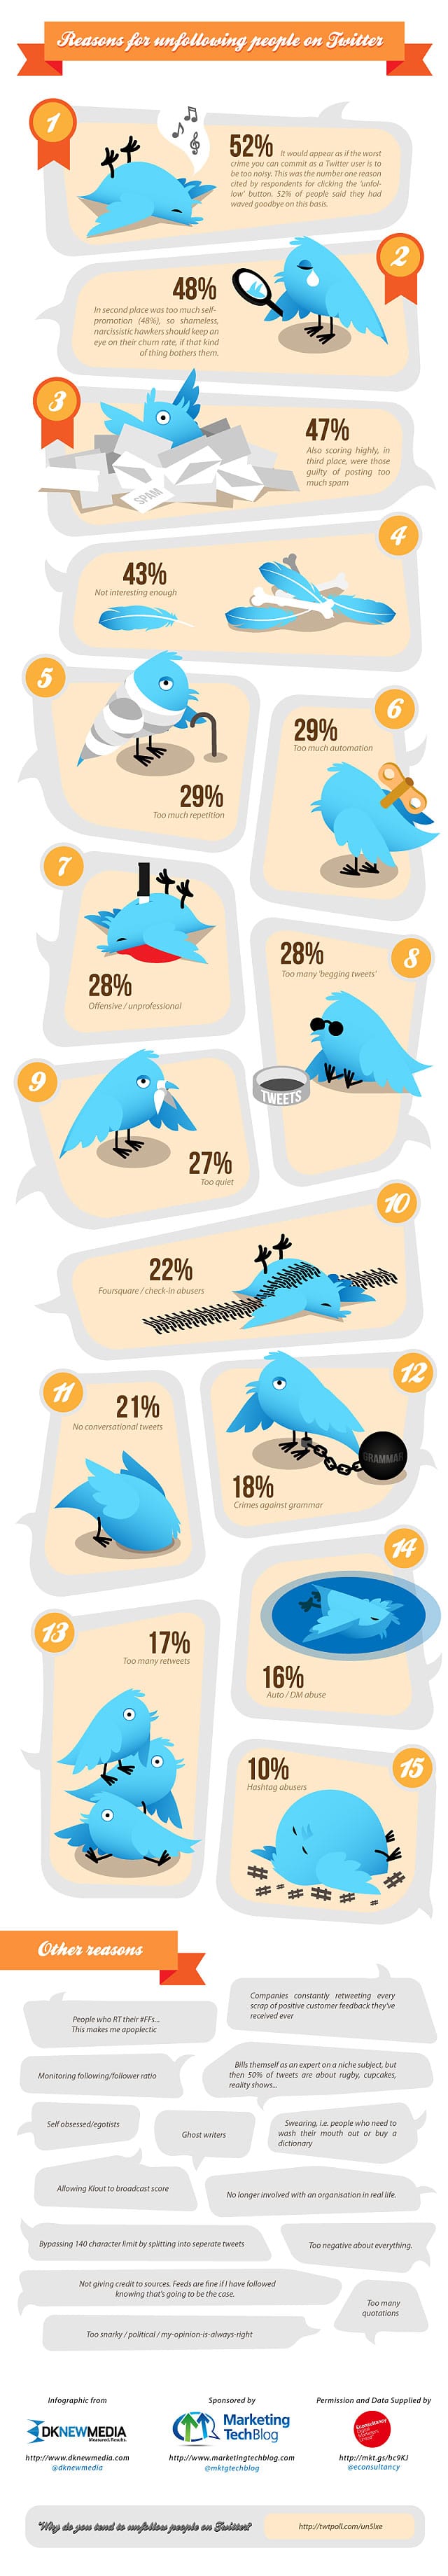 Top 15 Reasons Why People Unfollow You On Twitter [Infographic]